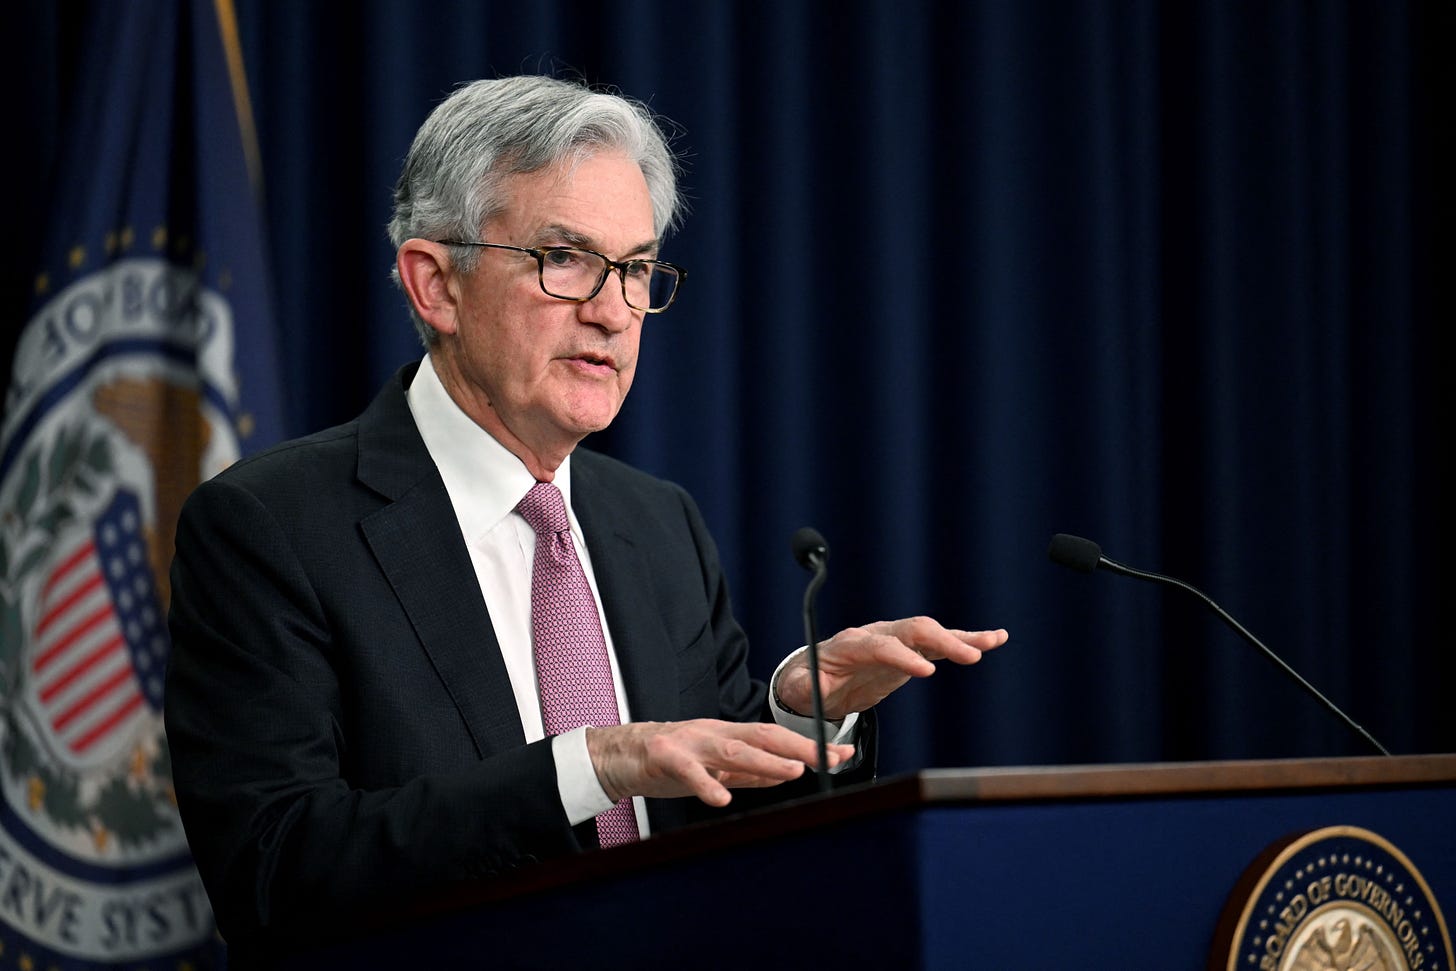 US Federal Reserve Chairman Jerome Powell speaks during a news conference in Washington, DC, on May 4, 2022. - The Federal Reserve on Wednesday raised the benchmark lending rate by a half percentage point in its ongoing effort to contain the highest inflation in four decades. (Photo by Jim WATSON / AFP) (Photo by JIM WATSON/AFP via Getty Images)